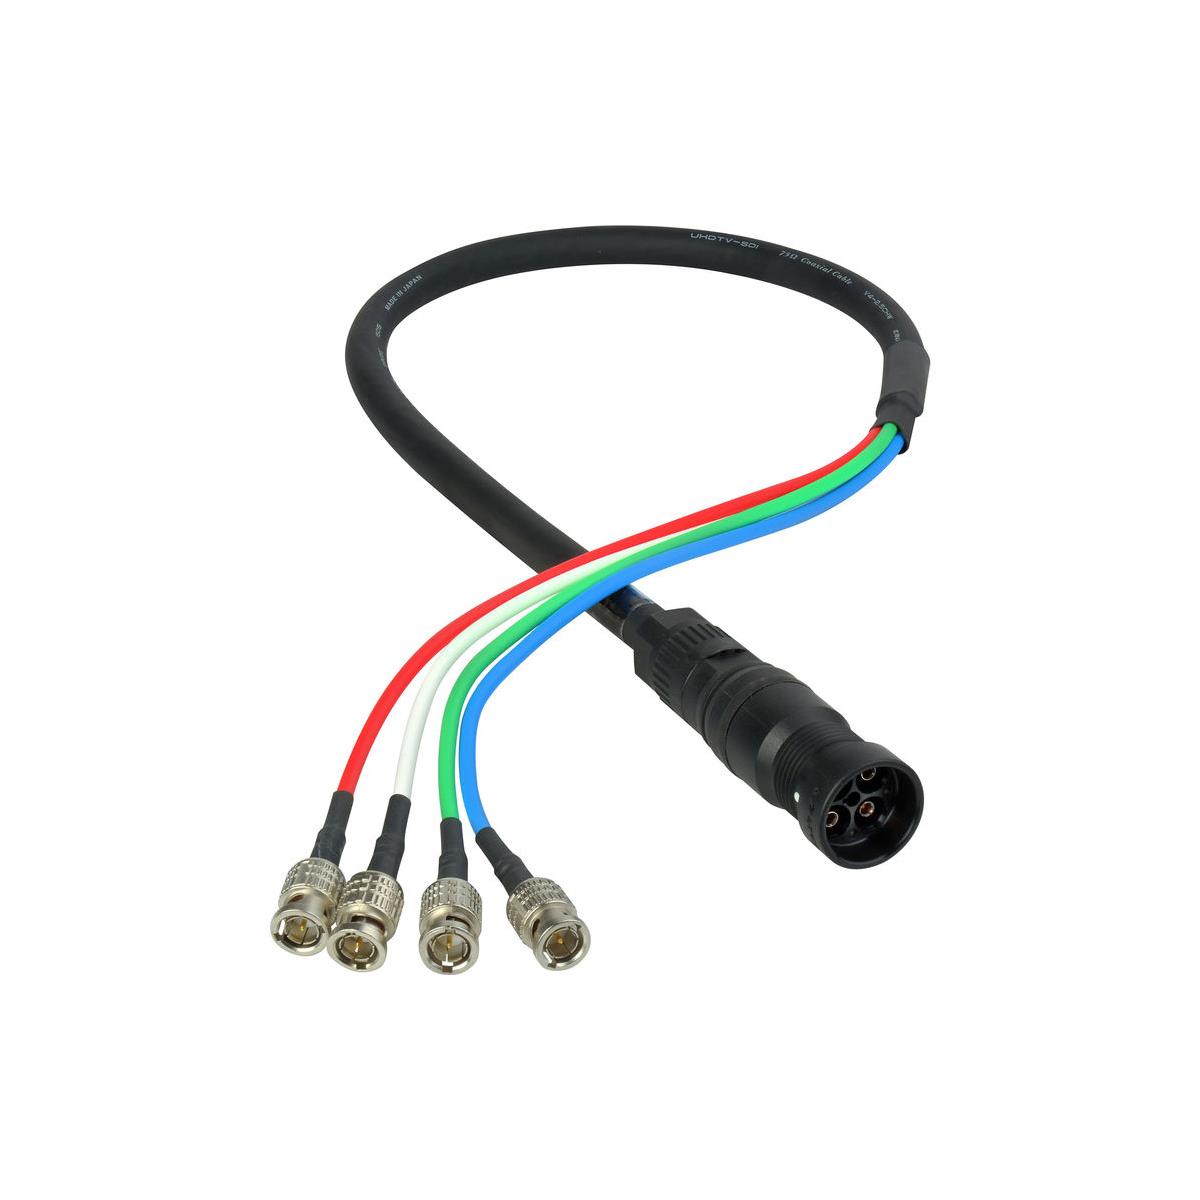 Laird 3' 4K UHD 3G HD-SDI 4-Channel DIN Female to BNC Camera Breakout Cable <b> 4-3G HD-SDI Signal Channel Quick Connect System for 4K/UHD Video Formats </b>One step, quick-connect Laird coax Canare cable assemblies connect 4 channels of 3G HD-SDI signals for 4K/UHD video formats. The Laird cables are assembled with Canare 4 channel, V4-2.5CHW flexible coaxial cable, allowing a break out to 4 Canare BNC or 4 DIN connectors. The Canare male connector, MDM-V4C25HW is designed to mate with the MDF-V4JRU panel mount receptacle which features a 4 DIN pass-through on the back side to increase your connectivity but not your rack space. Laird 4K UHD Canare camera cables assemblies make quick work of keeping everything in line and organized. Available in a variety of lengths. Use with the Canare MDF-V4JRU 4K DIN 1.0/2.3 4-channel chassis mount connector.• Quick connect and disconnect• Multiple 3G-SDI signals to 4K/UHD formats• Canare cable with solid and lightweight nylon resin body• Push-pull locking Canare coax connectors with protective rubber boots• High performance Canare BCP-B25HW BNC or 4 DCP-C25HD DIN connectors• Made in the USA in a Canare trained fiber shop• Canare V4-2.5CHW 4-Channel 4K 75Ohms Coaxial Cable• 4 DIN 1.0/2.3 connectors• MDF-V4JRU accepts MDM-V4C25HW and also DIN 1.0/2.3 plugs<b> Applications </b>• High density 3G-SDI• applications• Mobile trucks• Fly packs• Studios• 4K transmission• Consolidate HD-SDI lines